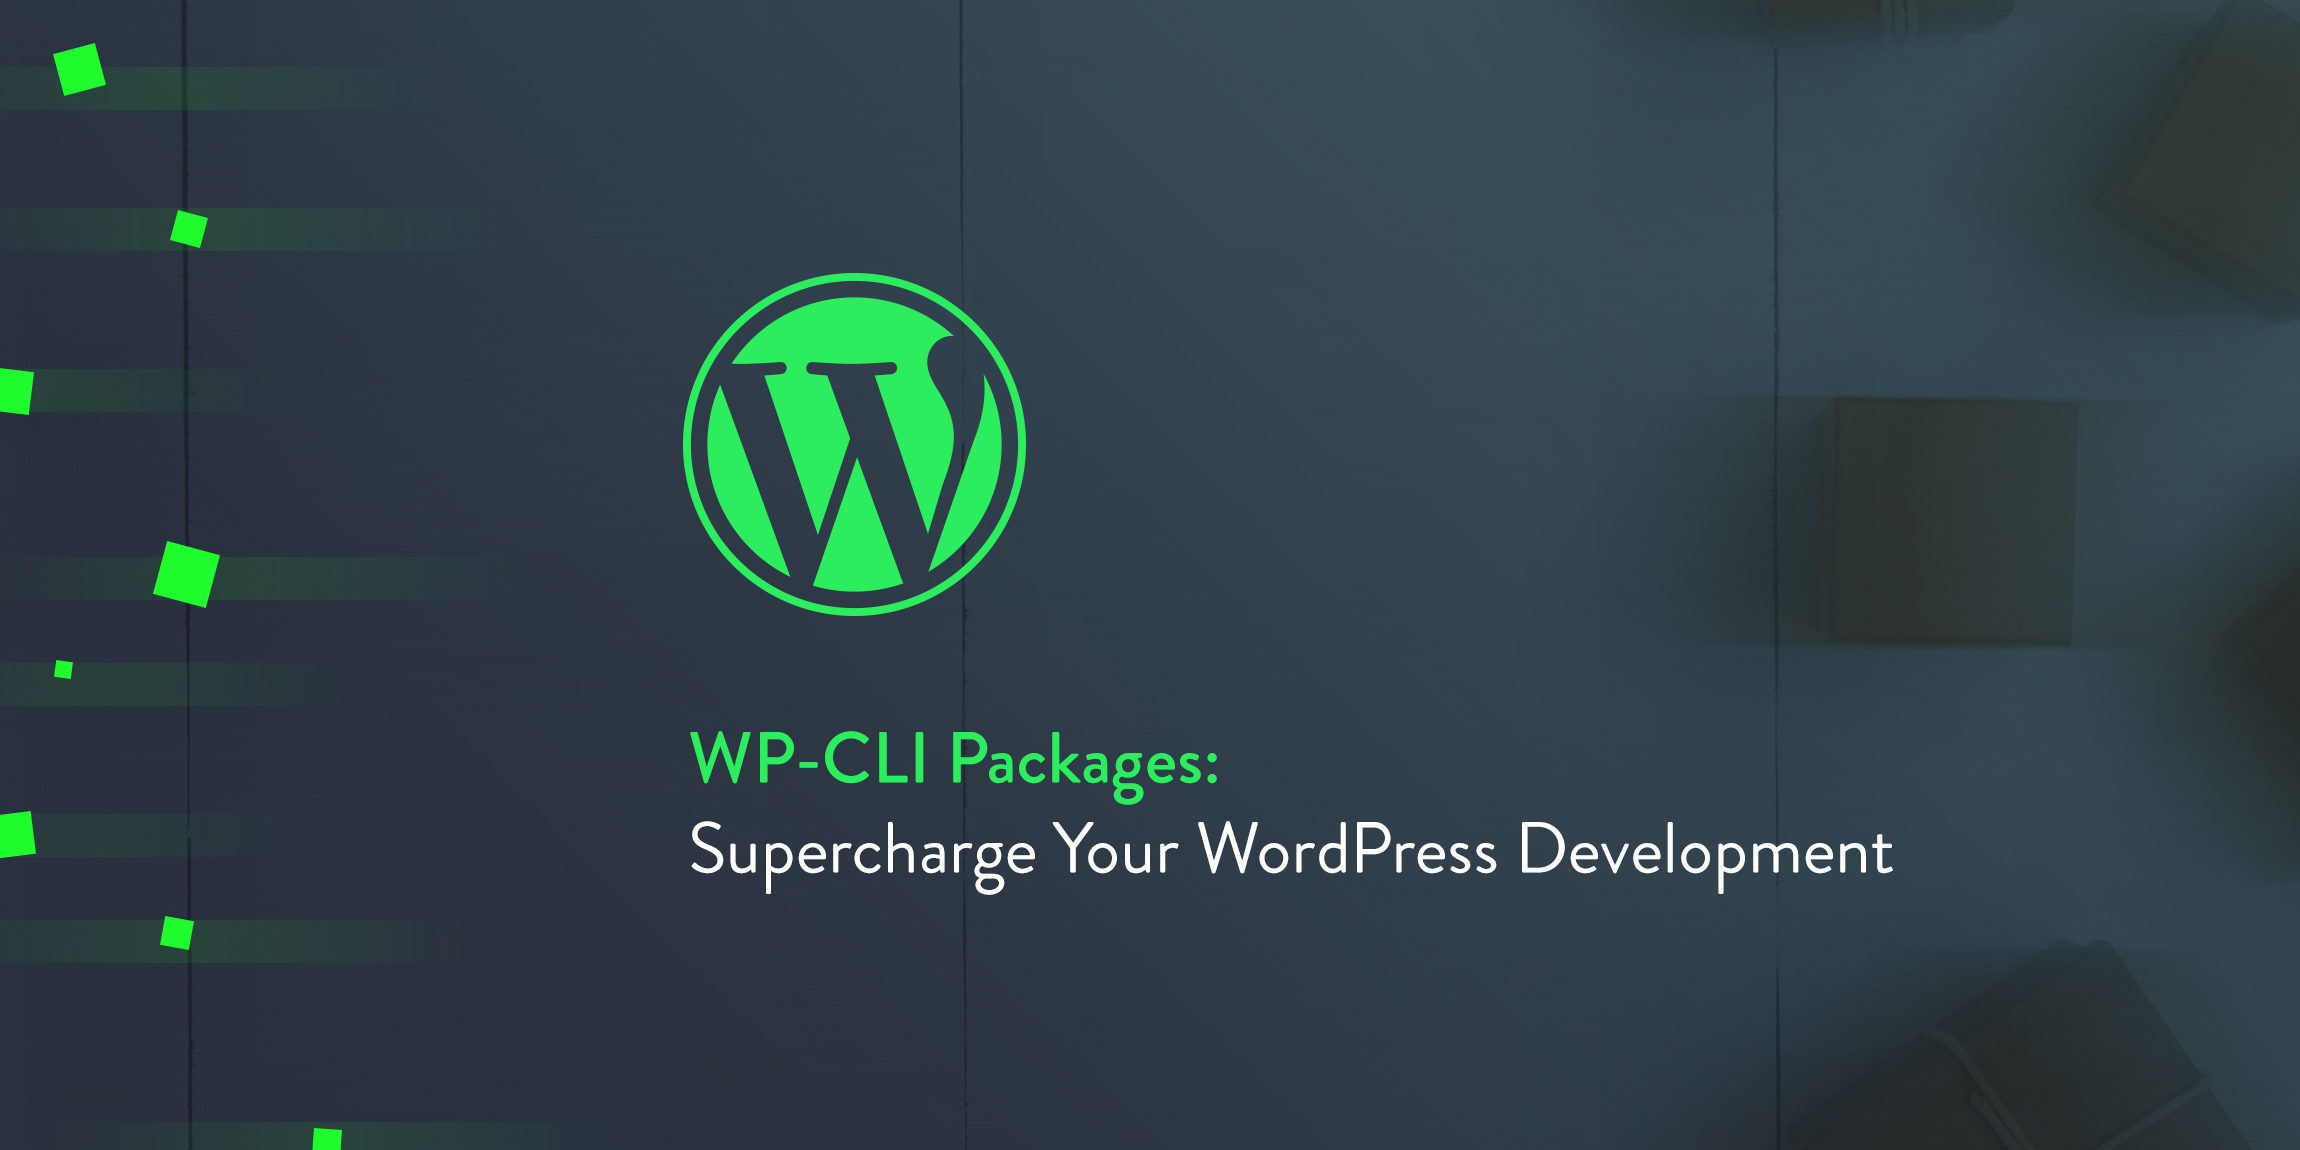 How to install WP-CLI to manage WordPress site